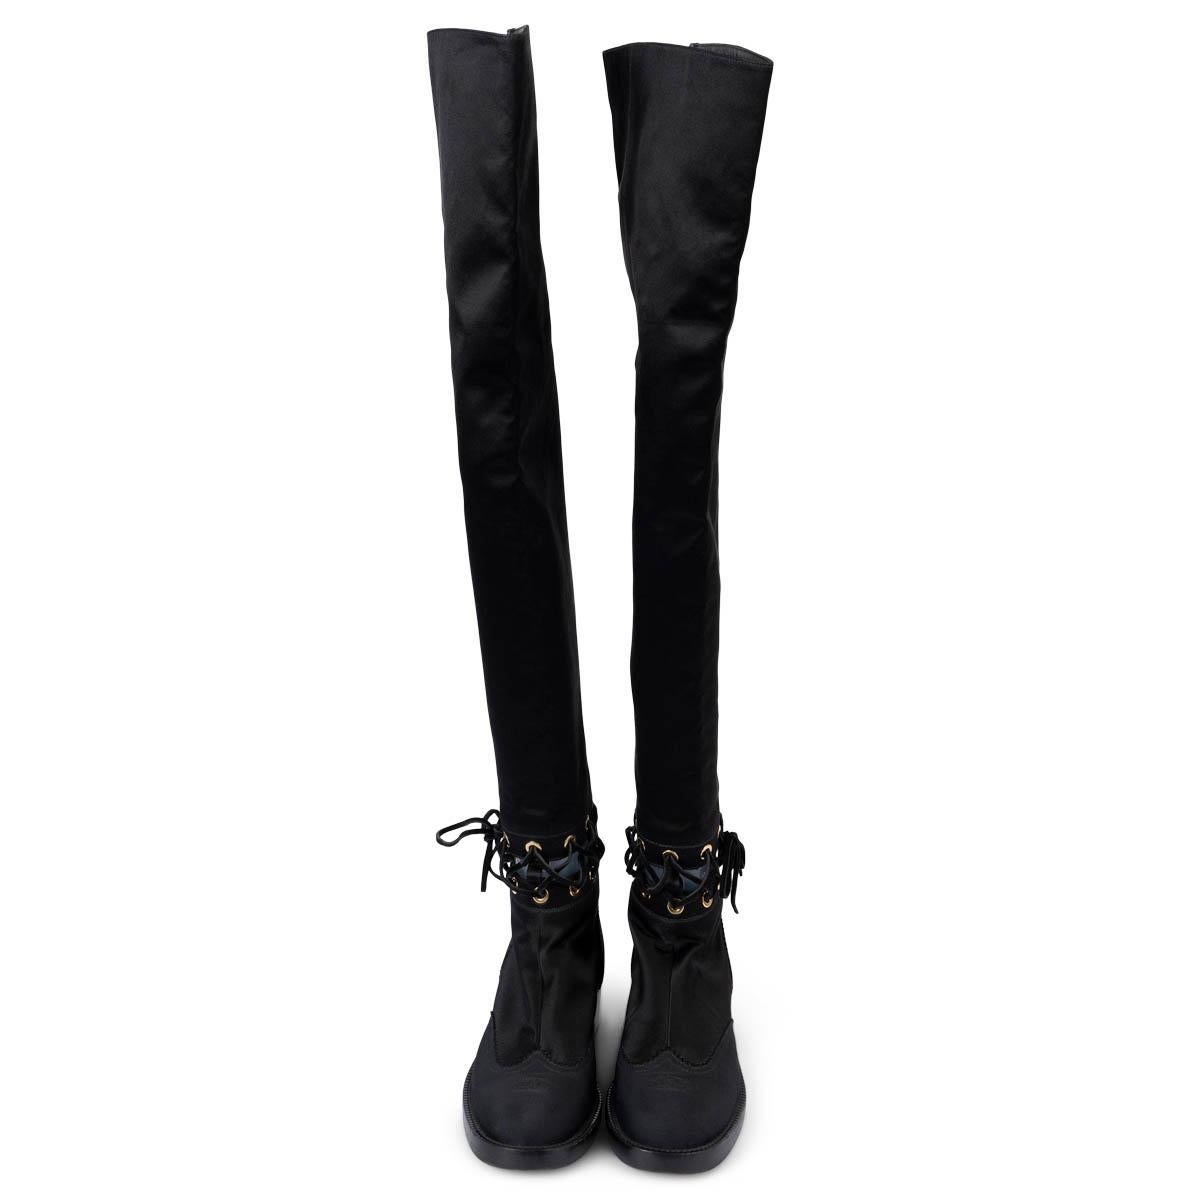 100% authentic Chanel interlocking cut-out over-knee boots in black satin and leather. The design features a cut-out with suede laces, grosgrain cap toe and trim, gold-tone hardware and a stacked block heel. Opens with a zipper on the back. Have